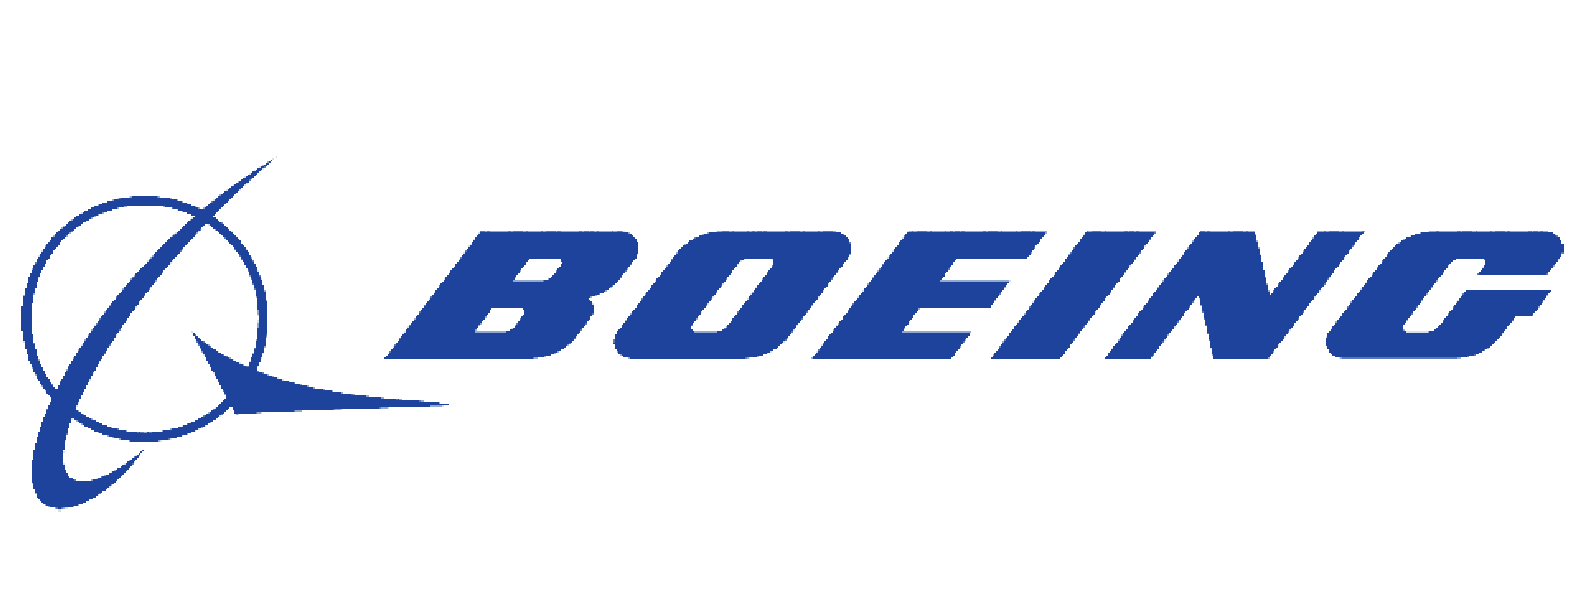 Boeing Co